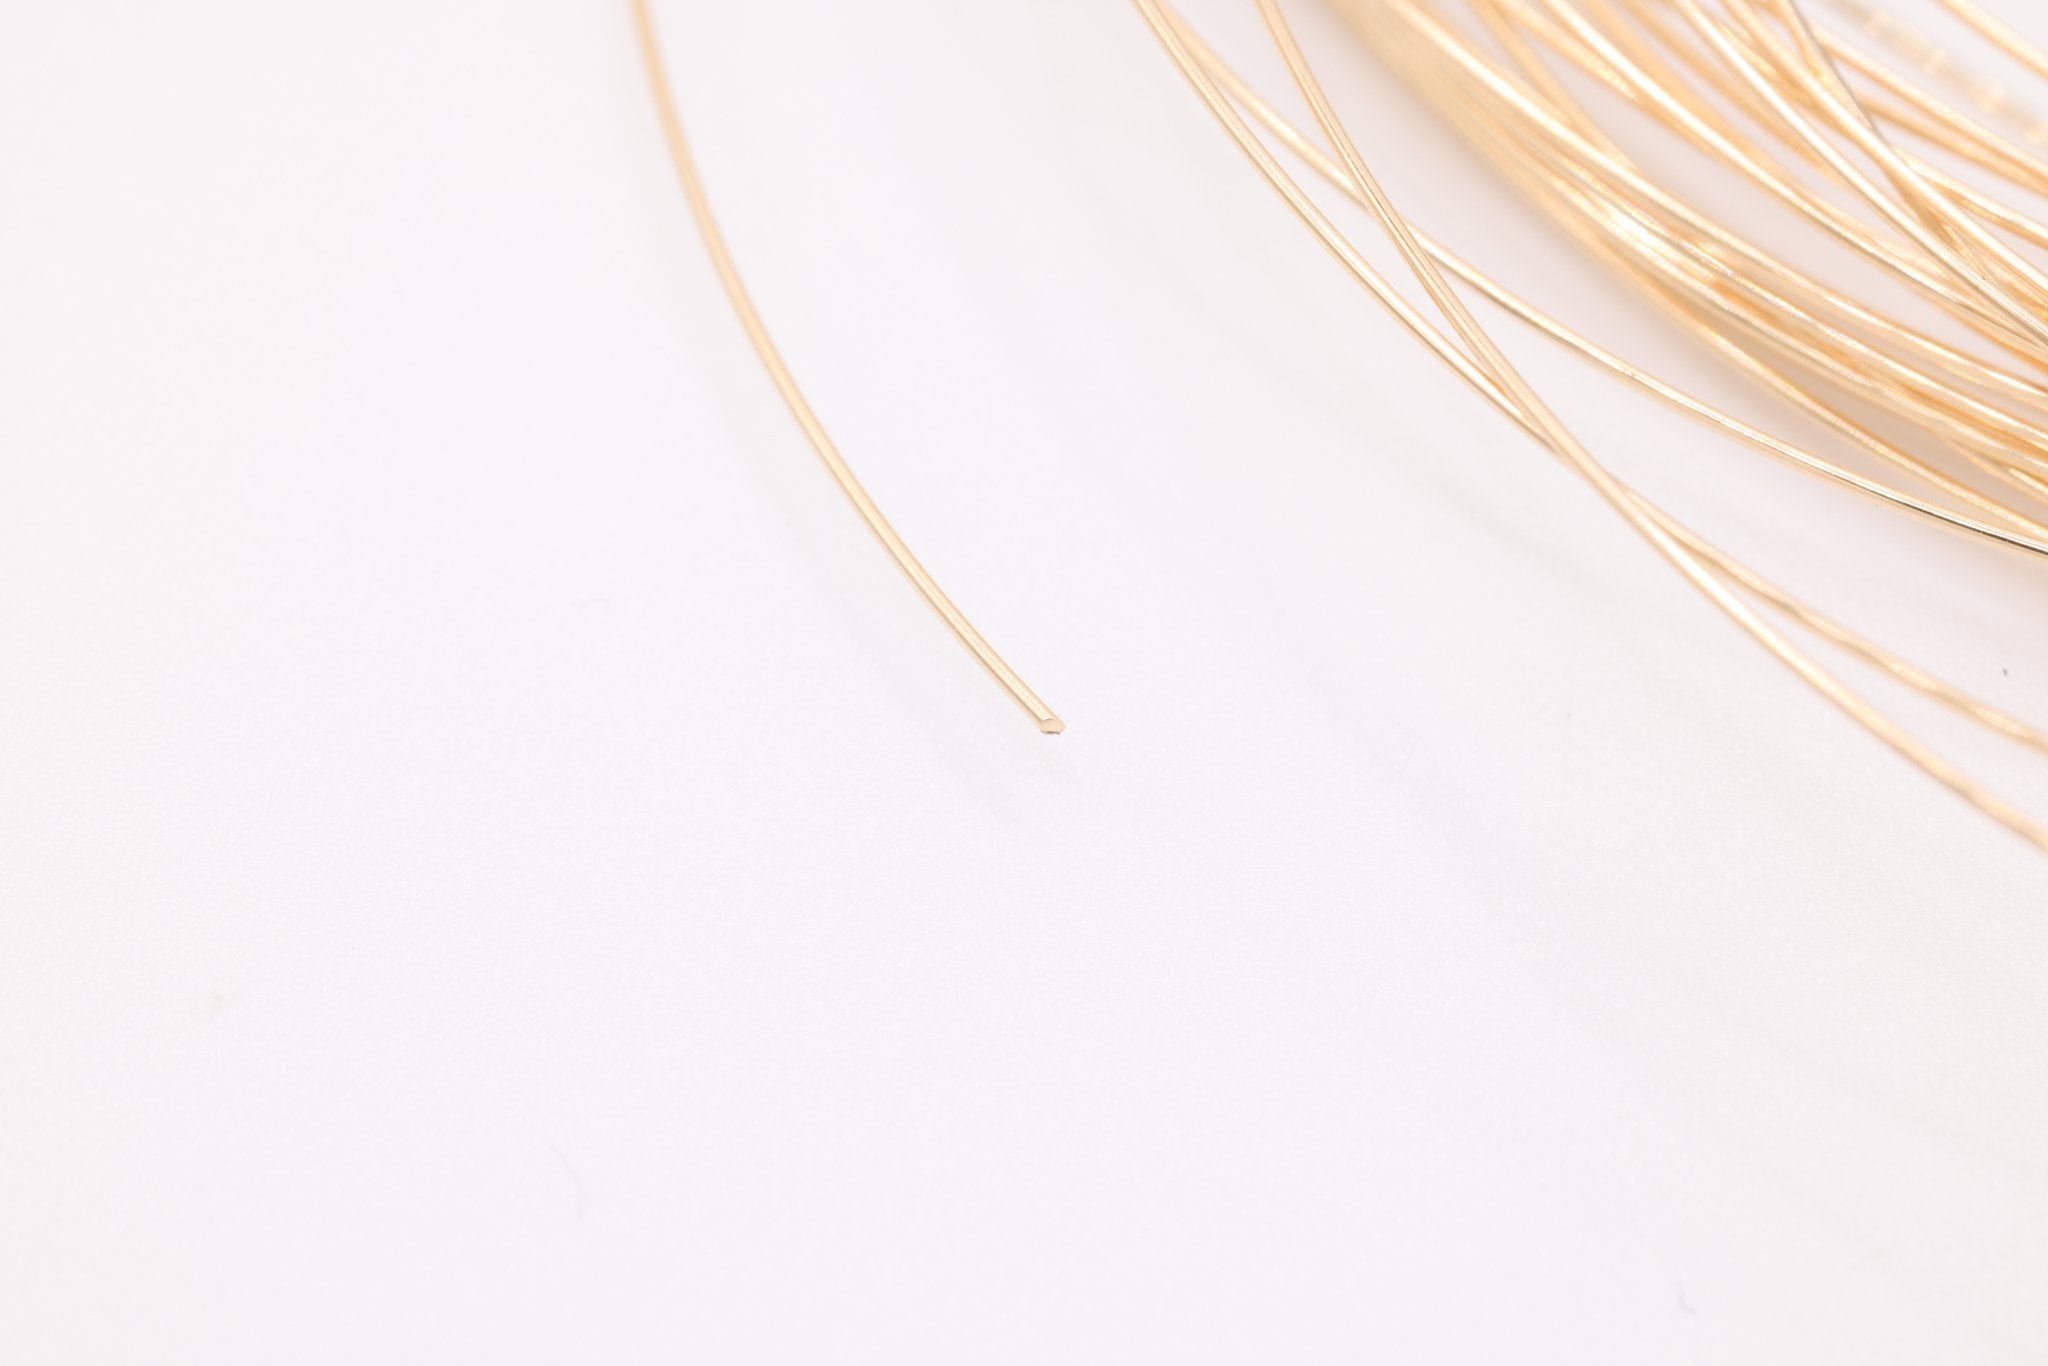 14k Gold Filled Wire, 18 Gauge 1.0mm, Gold Wire, Half Hard Jewelry Wire - HarperCrown